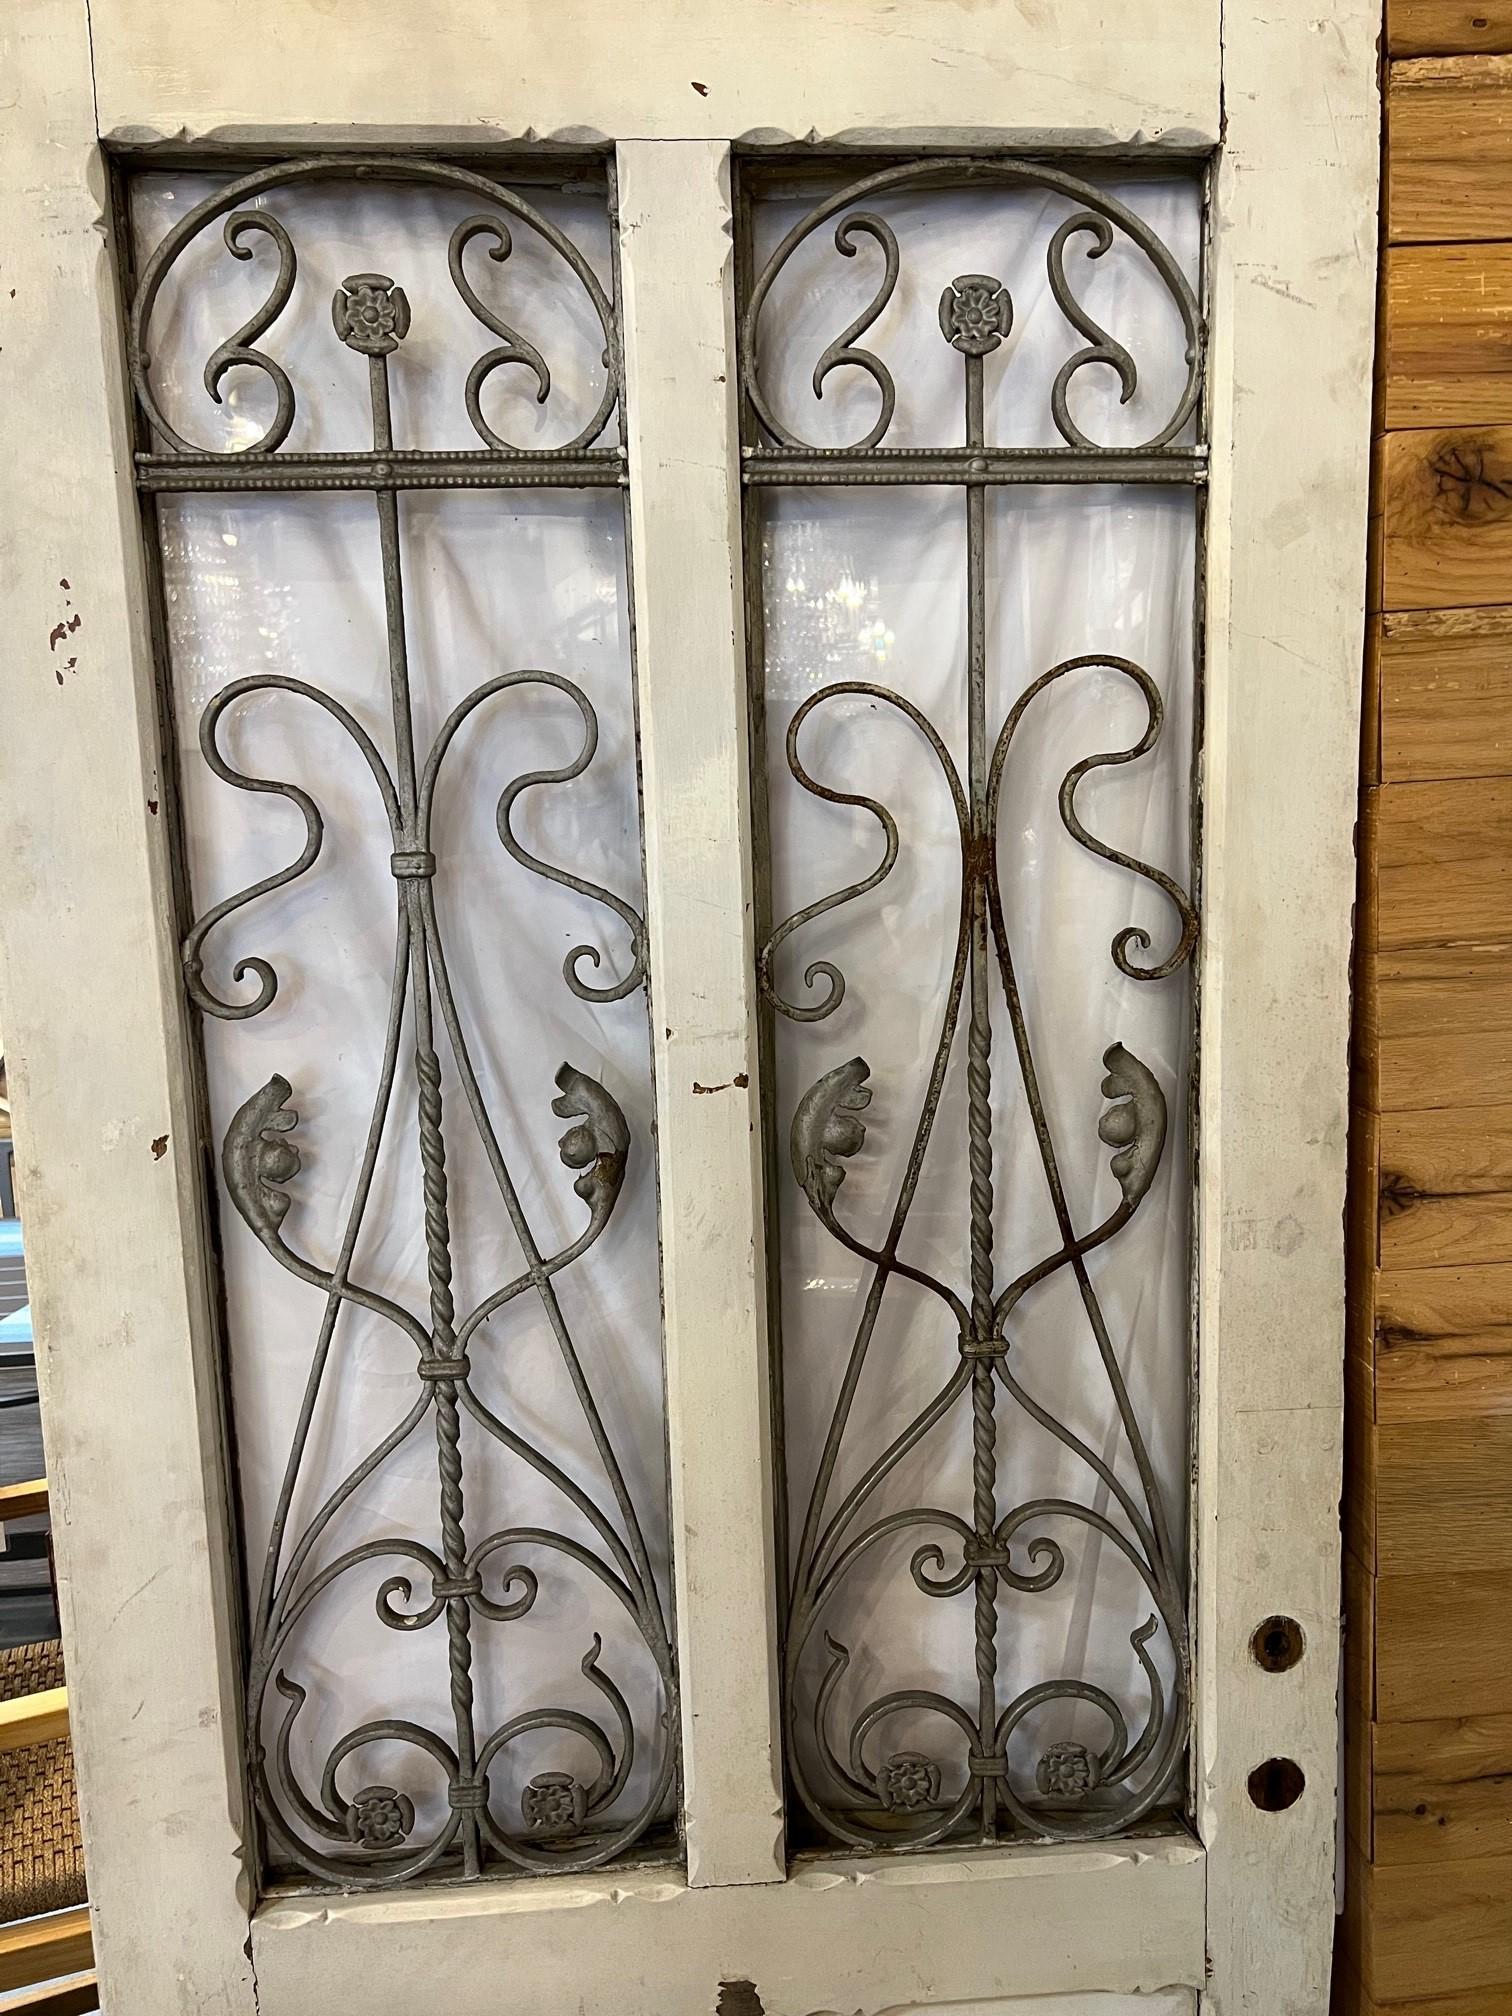 Early 20th Century antique wood entrance door with decorative iron panels and two opening glass door panels. This is a great door salvaged from an estate in western PA. but originally could be from France or Belgium. This door was used as a entrance